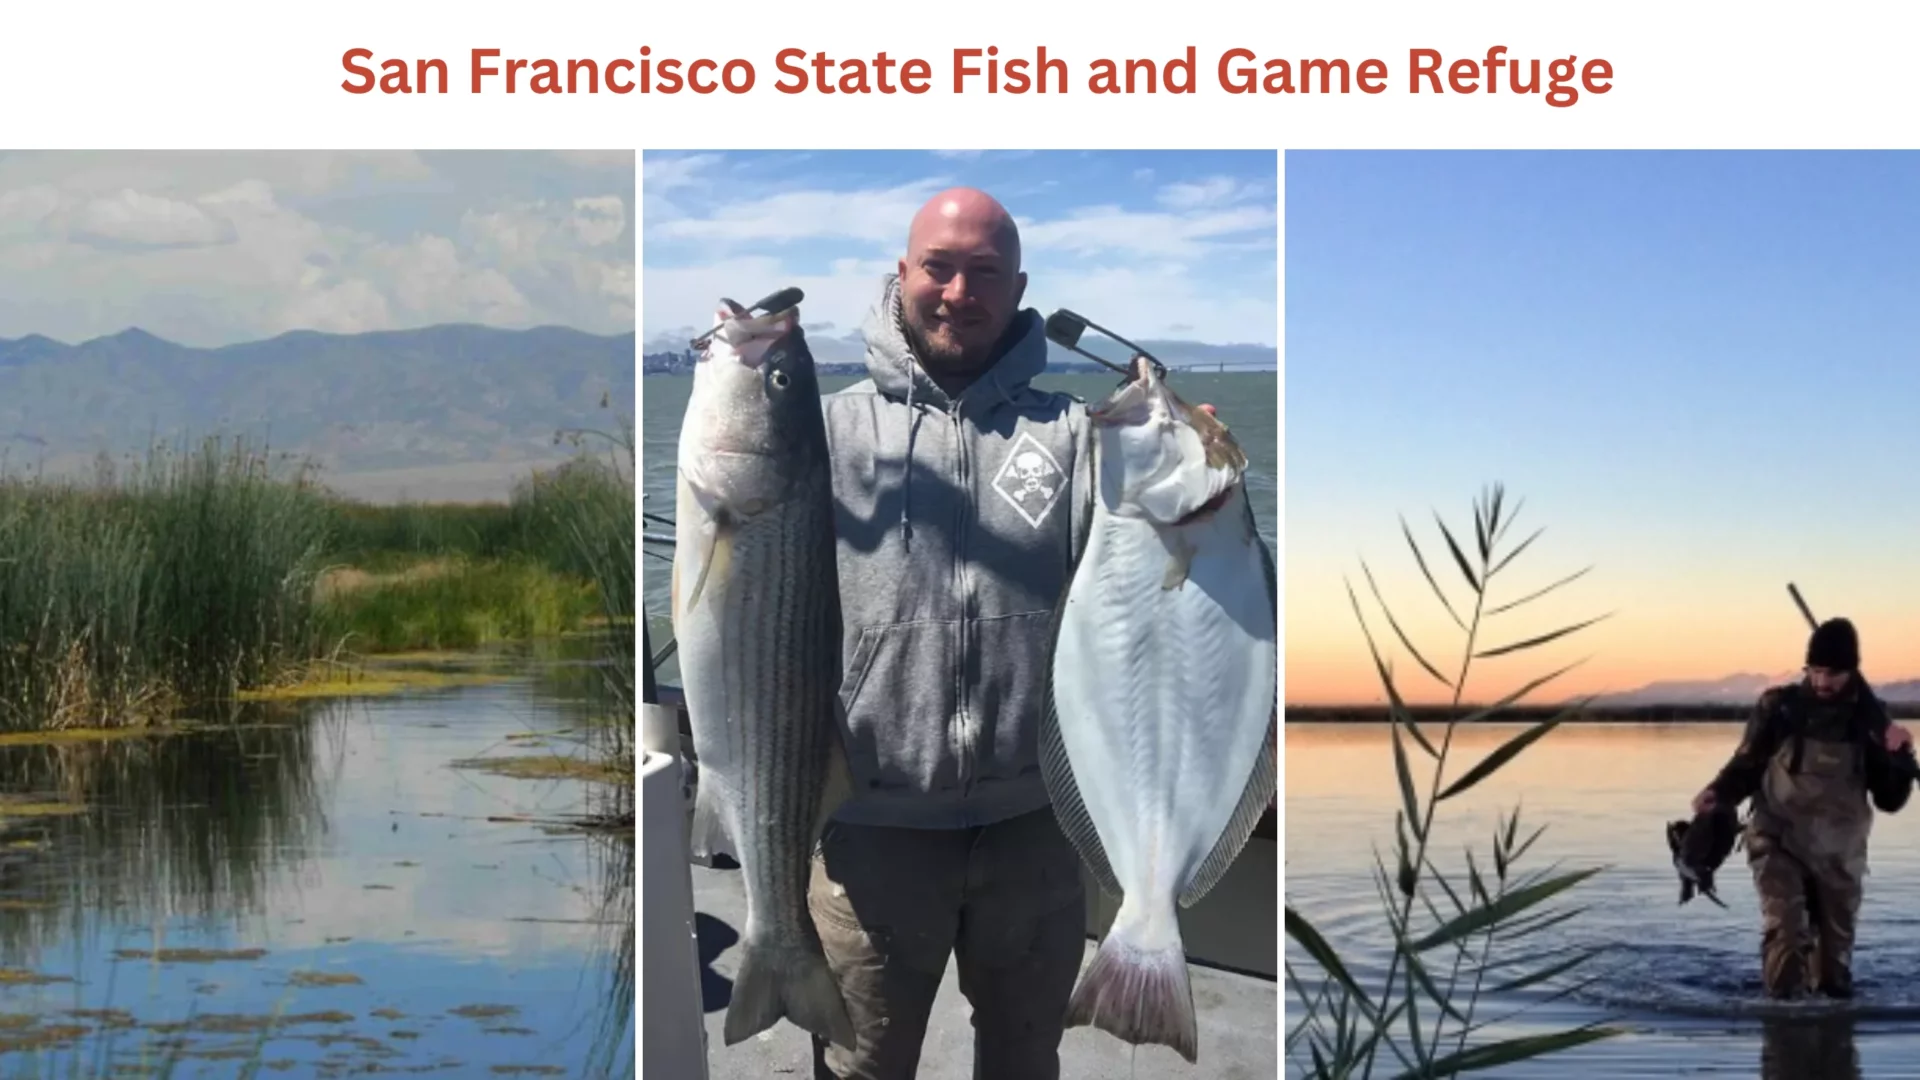 San Francisco State Fish and Game Refuge